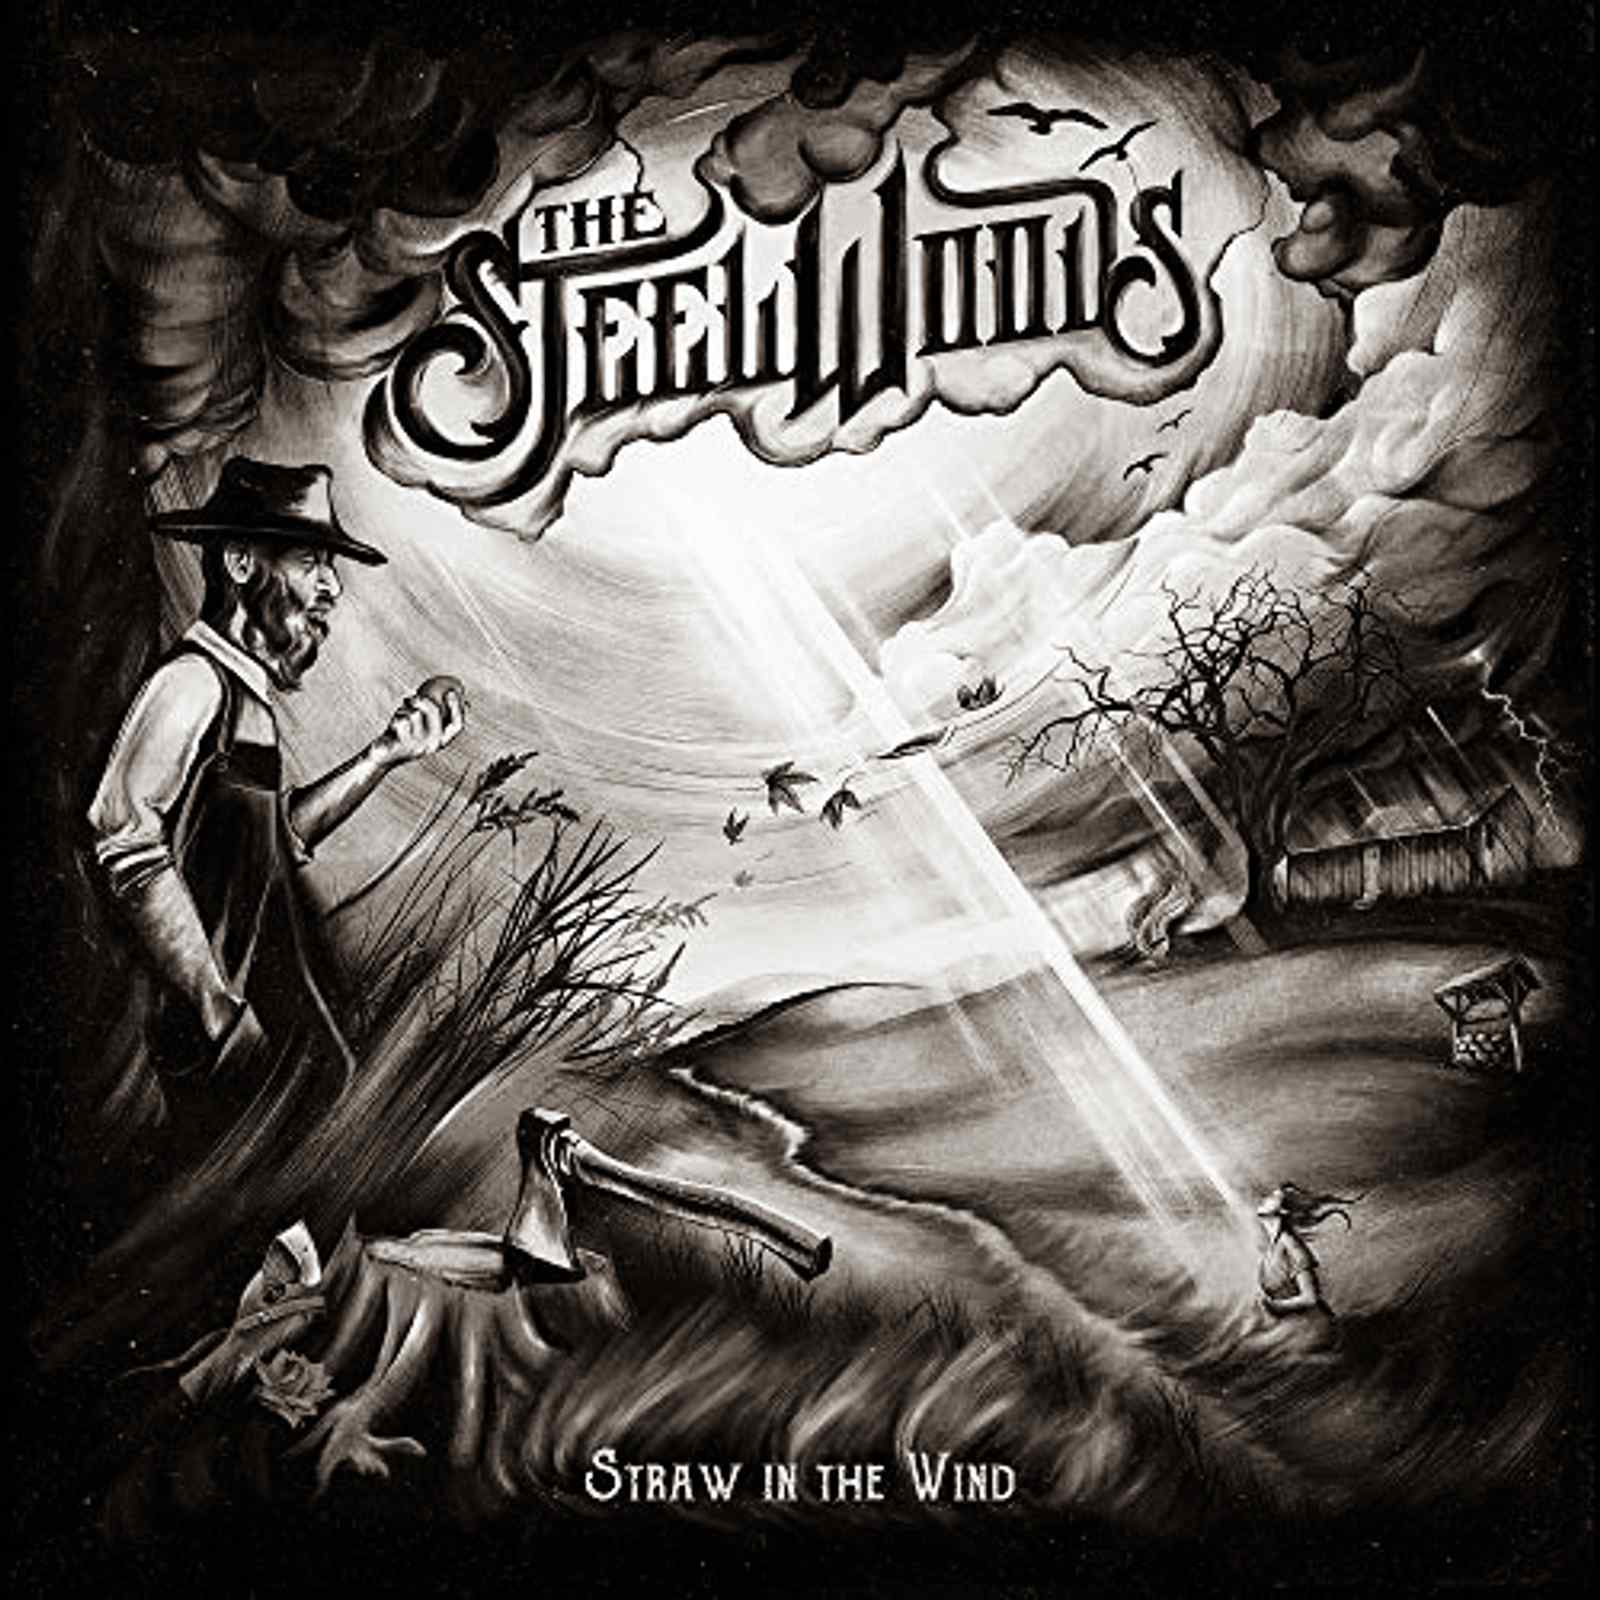 The Steel Woods: Straw in the Wind